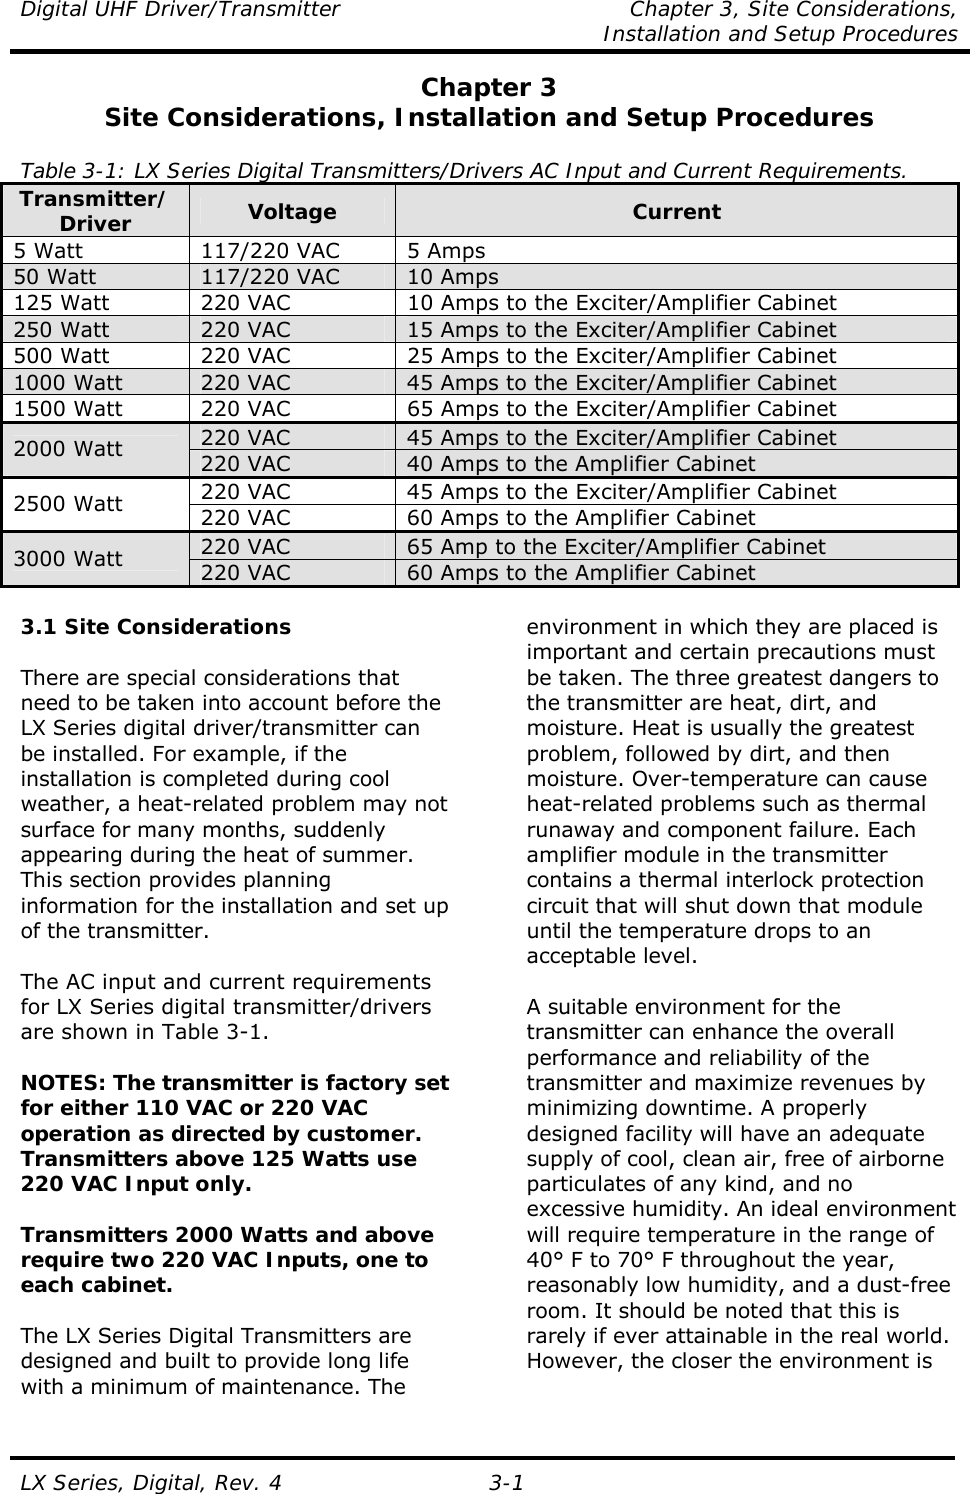 Digital UHF Driver/Transmitter  Chapter 3, Site Considerations,    Installation and Setup Procedures  LX Series, Digital, Rev. 4 3-1 Chapter 3 Site Considerations, Installation and Setup Procedures  Table 3-1: LX Series Digital Transmitters/Drivers AC Input and Current Requirements. Transmitter/Driver  Voltage  Current 5 Watt  117/220 VAC  5 Amps 50 Watt  117/220 VAC  10 Amps 125 Watt  220 VAC  10 Amps to the Exciter/Amplifier Cabinet 250 Watt  220 VAC  15 Amps to the Exciter/Amplifier Cabinet 500 Watt  220 VAC  25 Amps to the Exciter/Amplifier Cabinet 1000 Watt  220 VAC  45 Amps to the Exciter/Amplifier Cabinet 1500 Watt  220 VAC  65 Amps to the Exciter/Amplifier Cabinet 220 VAC  45 Amps to the Exciter/Amplifier Cabinet 2000 Watt  220 VAC  40 Amps to the Amplifier Cabinet 220 VAC  45 Amps to the Exciter/Amplifier Cabinet 2500 Watt  220 VAC  60 Amps to the Amplifier Cabinet 220 VAC  65 Amp to the Exciter/Amplifier Cabinet 3000 Watt  220 VAC  60 Amps to the Amplifier Cabinet  3.1 Site Considerations  There are special considerations that need to be taken into account before the LX Series digital driver/transmitter can be installed. For example, if the installation is completed during cool weather, a heat-related problem may not surface for many months, suddenly appearing during the heat of summer. This section provides planning information for the installation and set up of the transmitter.  The AC input and current requirements for LX Series digital transmitter/drivers are shown in Table 3-1.  NOTES: The transmitter is factory set for either 110 VAC or 220 VAC operation as directed by customer.  Transmitters above 125 Watts use 220 VAC Input only.  Transmitters 2000 Watts and above require two 220 VAC Inputs, one to each cabinet.  The LX Series Digital Transmitters are designed and built to provide long life with a minimum of maintenance. The environment in which they are placed is important and certain precautions must be taken. The three greatest dangers to the transmitter are heat, dirt, and moisture. Heat is usually the greatest problem, followed by dirt, and then moisture. Over-temperature can cause heat-related problems such as thermal runaway and component failure. Each amplifier module in the transmitter contains a thermal interlock protection circuit that will shut down that module until the temperature drops to an acceptable level.  A suitable environment for the transmitter can enhance the overall performance and reliability of the transmitter and maximize revenues by minimizing downtime. A properly designed facility will have an adequate supply of cool, clean air, free of airborne particulates of any kind, and no excessive humidity. An ideal environment will require temperature in the range of 40° F to 70° F throughout the year, reasonably low humidity, and a dust-free room. It should be noted that this is rarely if ever attainable in the real world. However, the closer the environment is 